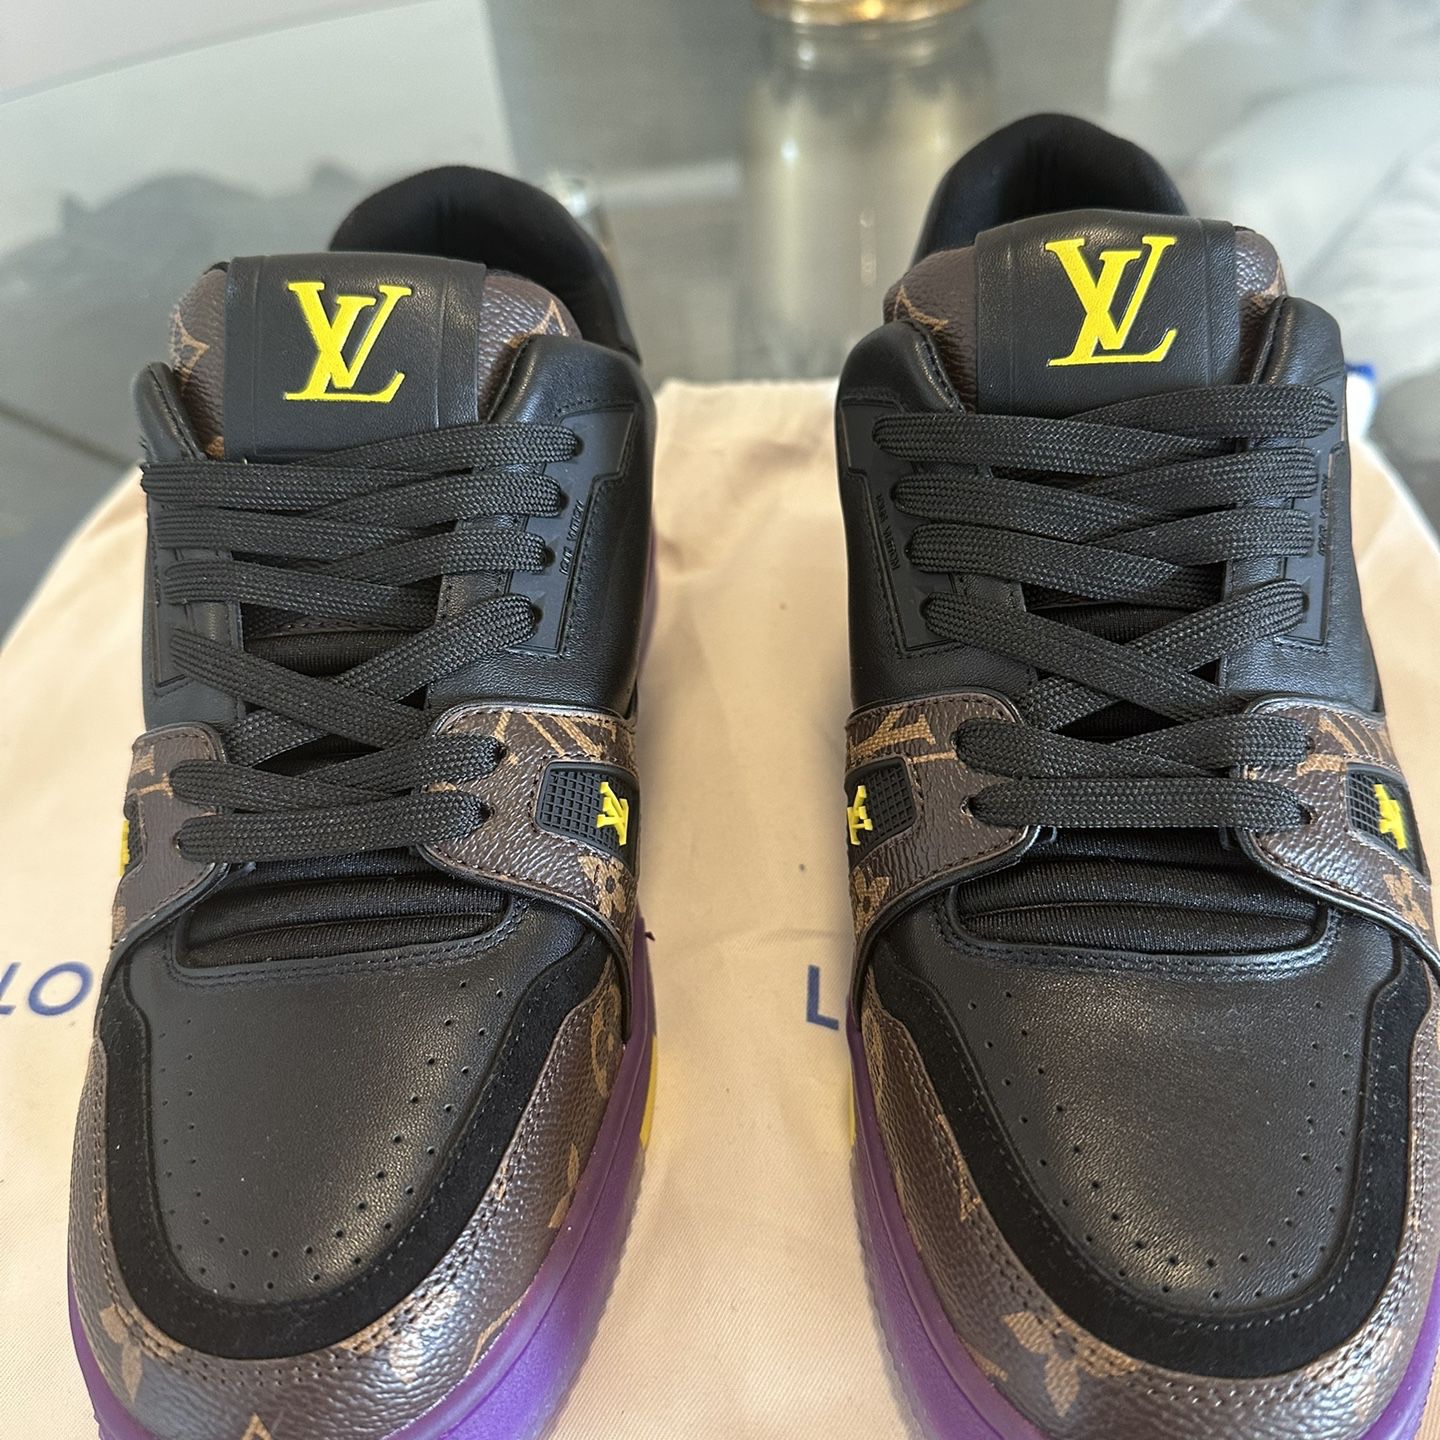 Lv trainer for Sale in Decatur, GA - OfferUp